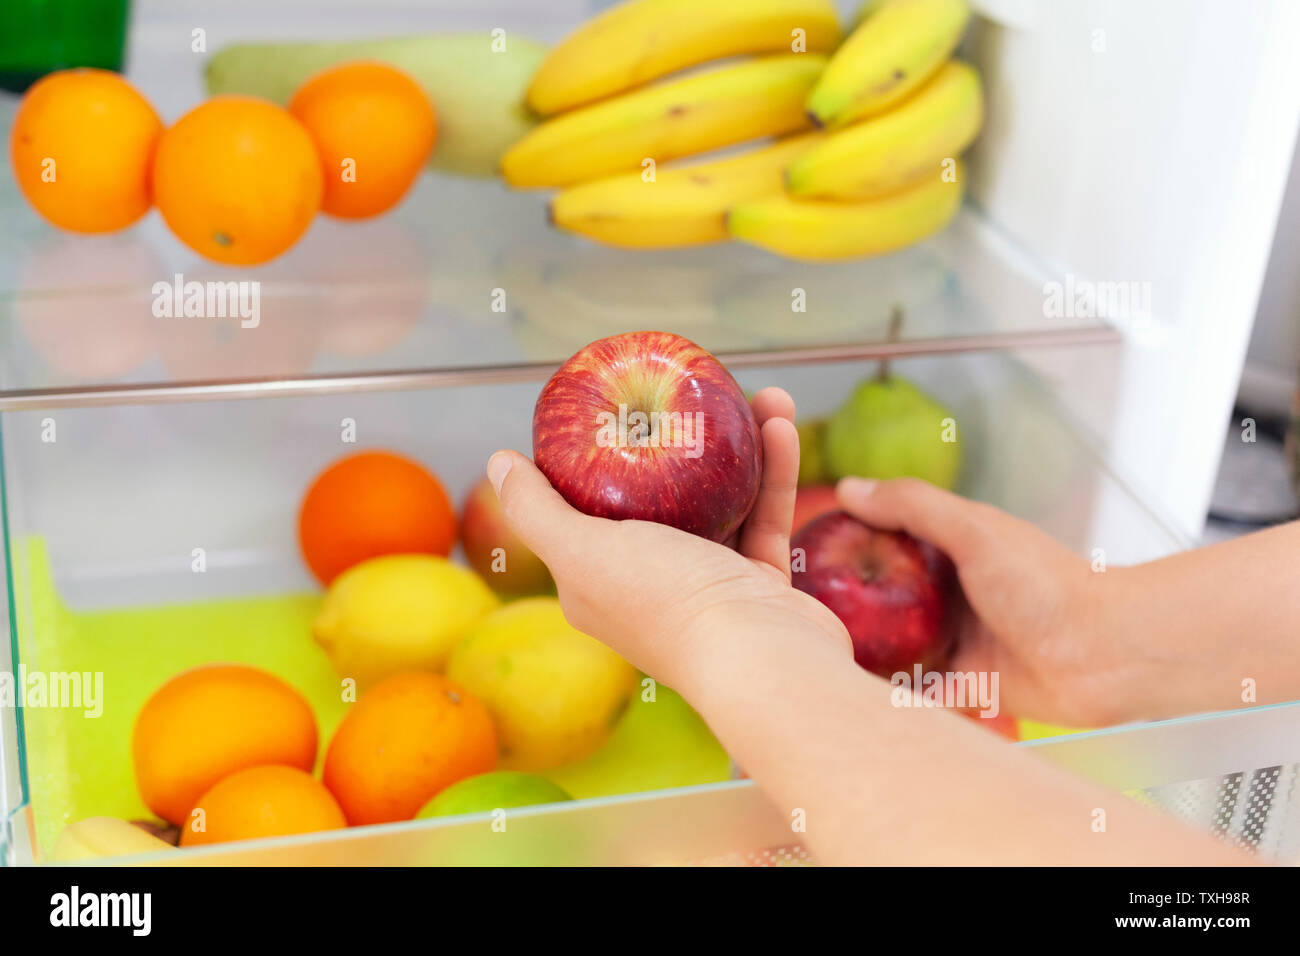 Woman getting red apples from fridge. Close up. Stock Photo